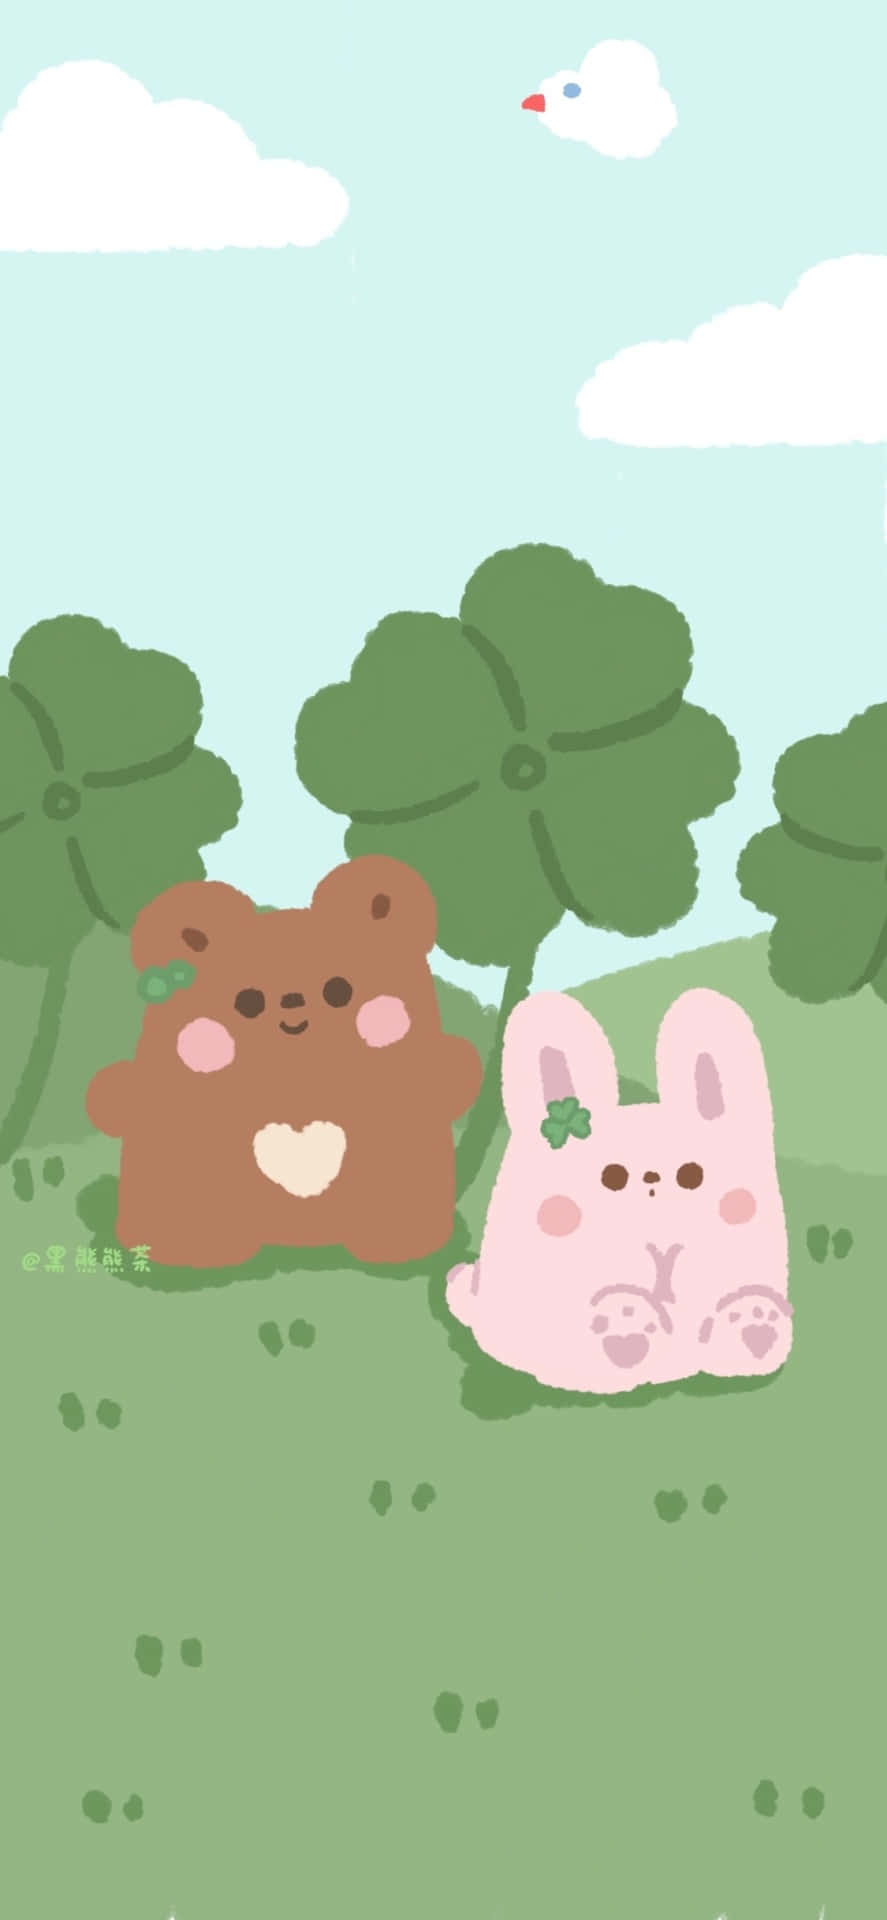 A Cartoon Of Two Teddy Bears In The Grass Wallpaper